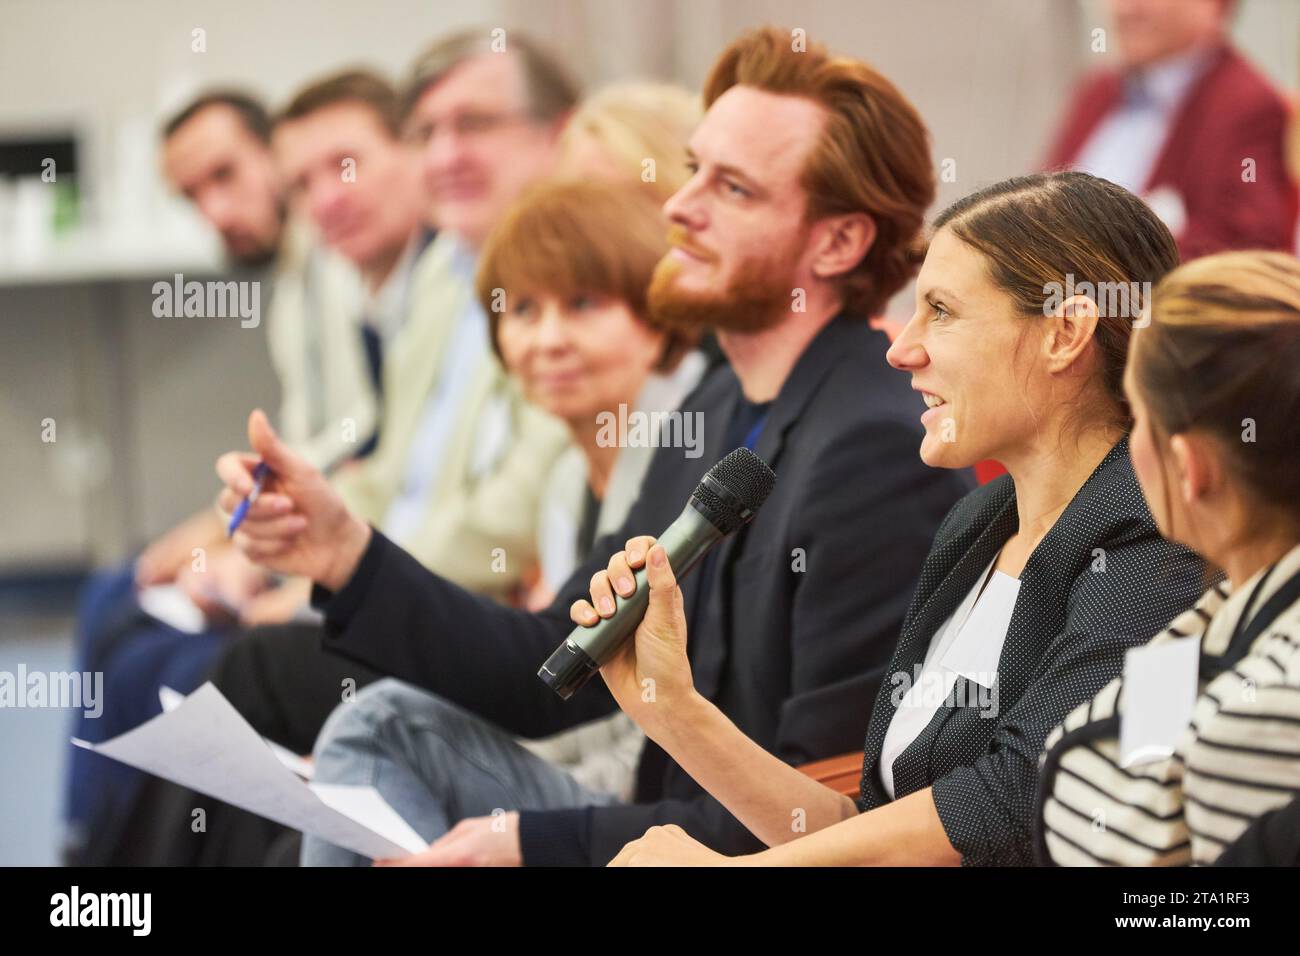 Businesswoman answering through microphone during business seminar at convention center Stock Photo